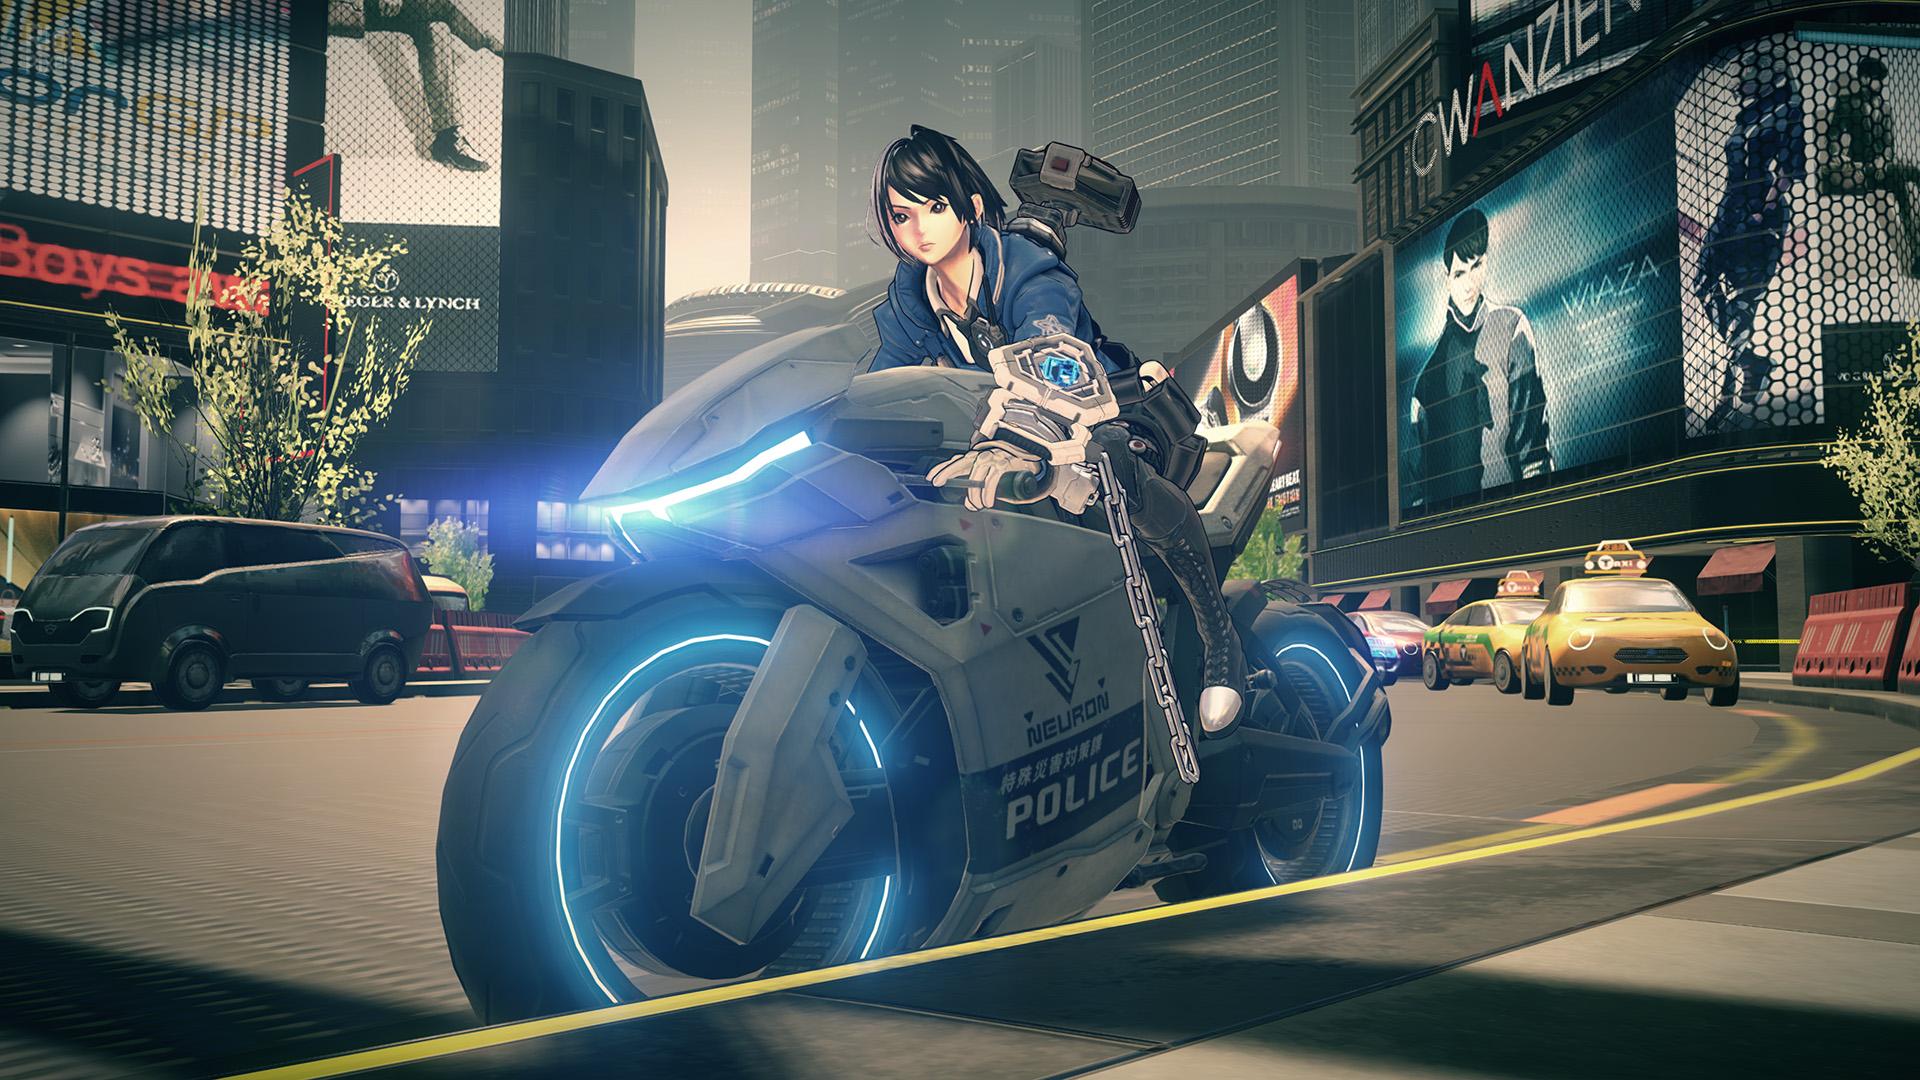 Video Game Astral Chain Wallpaper 67551 1920x1080px